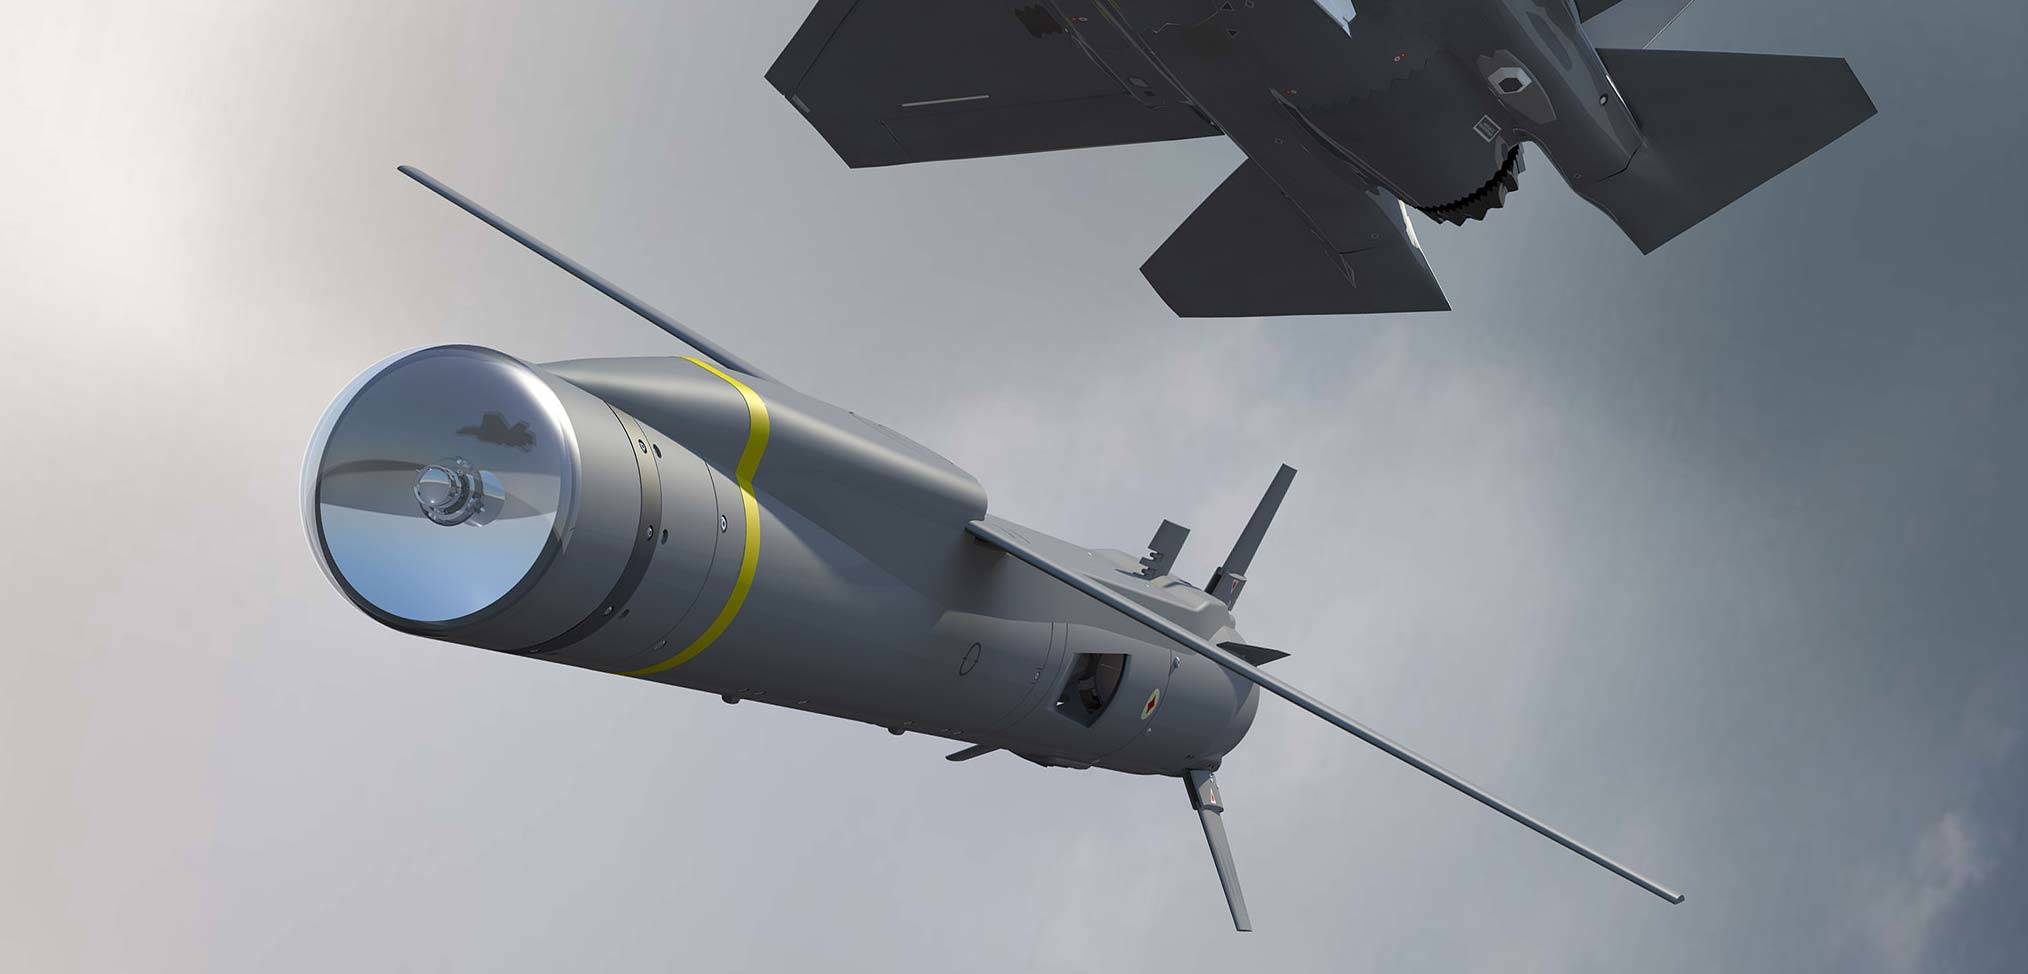 Putting the ‘strike’ in UK carrier strike – the SPEAR 3 stand-off weapon